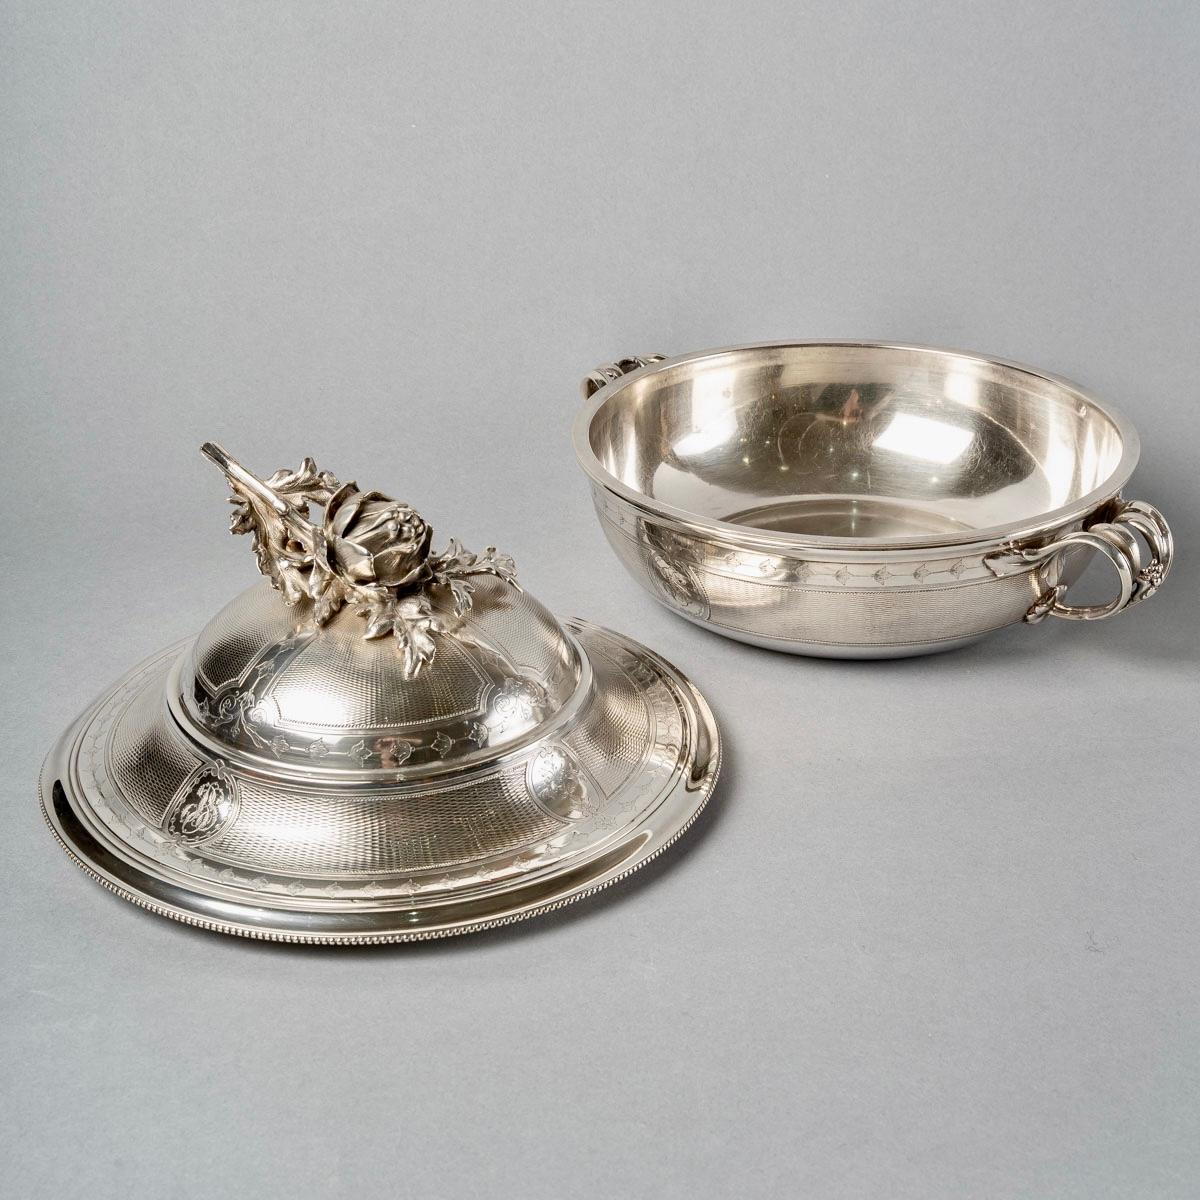 Early 20th Century Christofle, Pair of Tureens Guilloche Sterling Silver Artichoke Handle